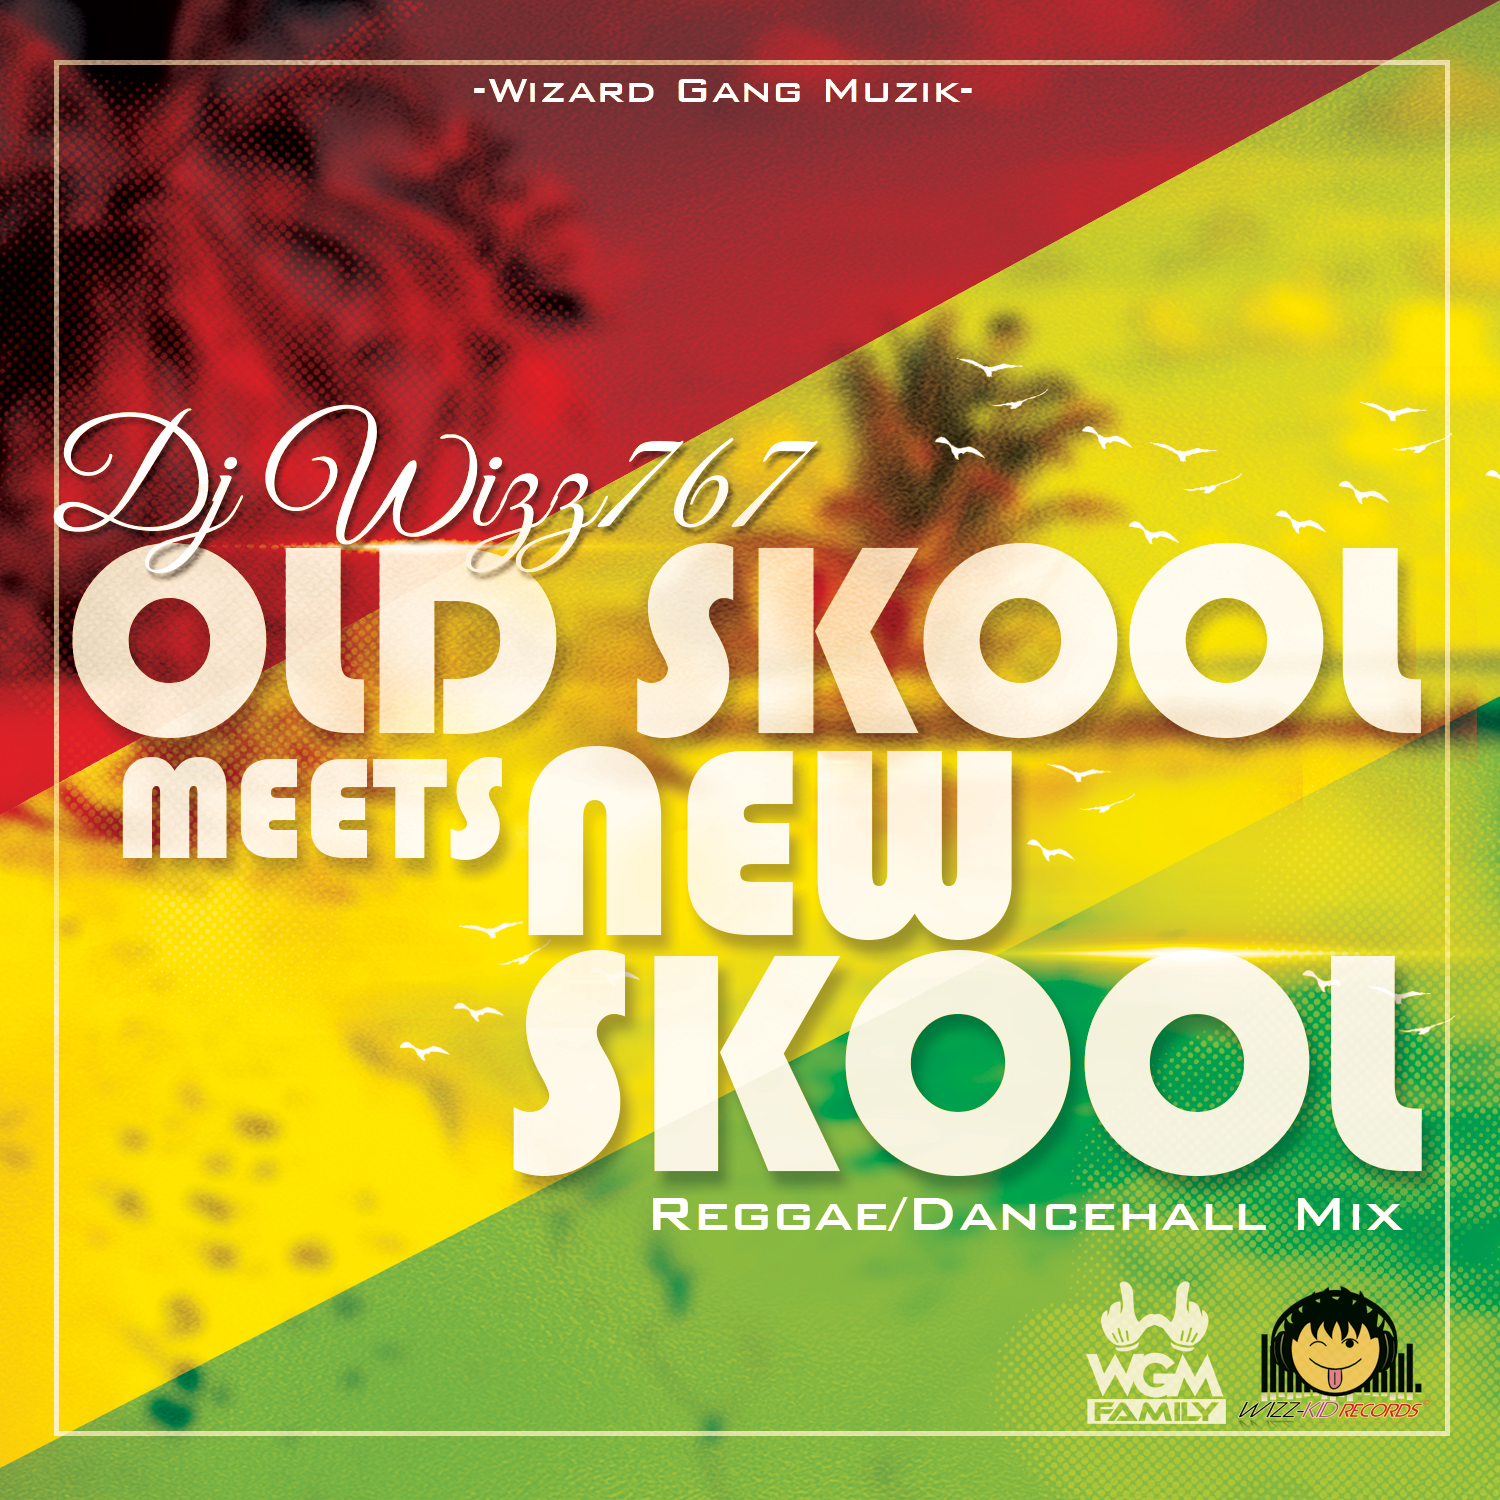 You are currently viewing Dj Wizz767- OLD SKOOL MEETS NEW SKOOL (ReggaeDancehall Mix)